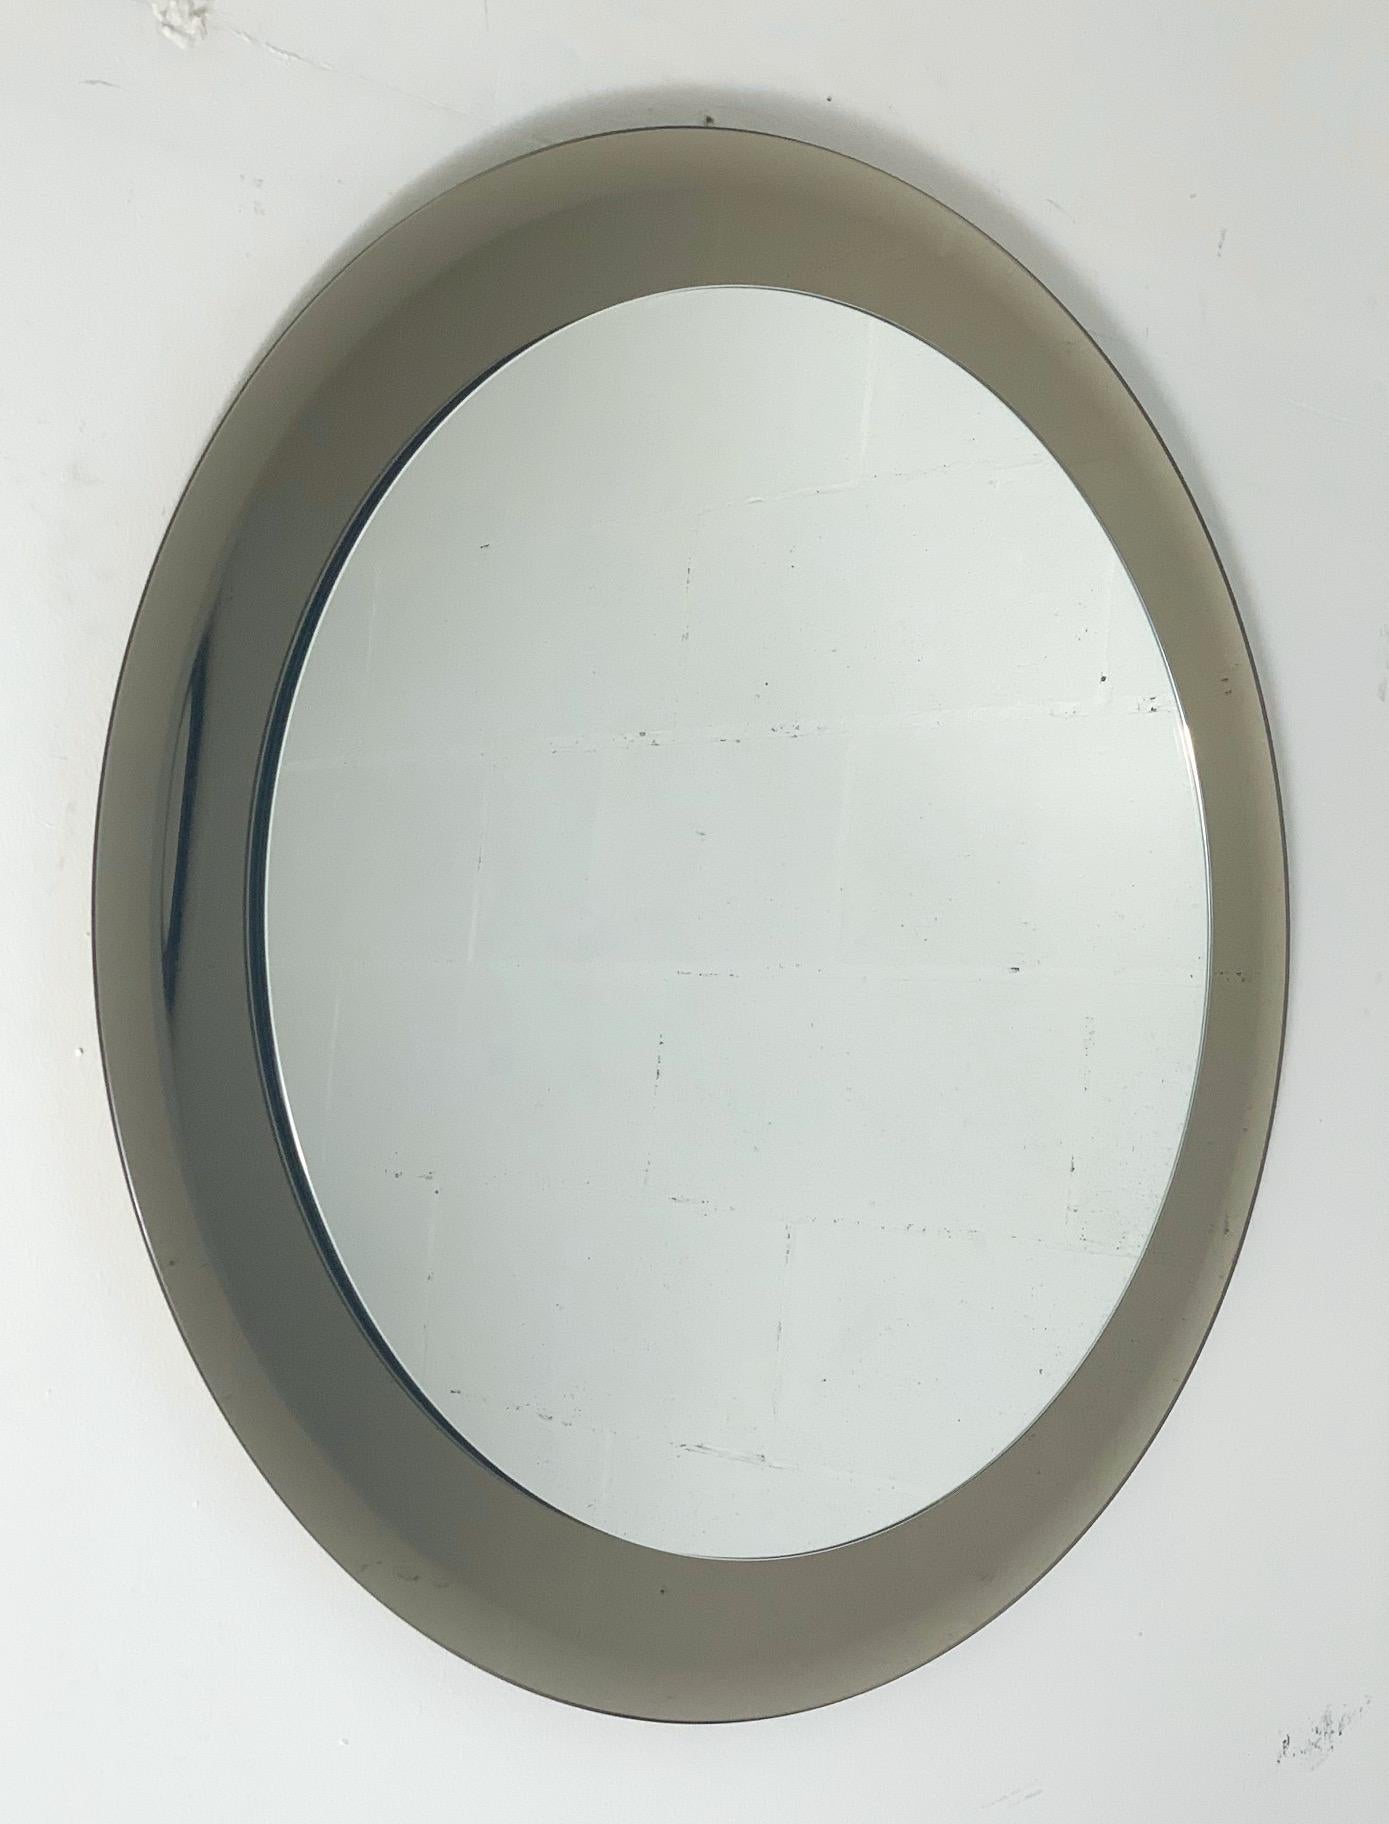 Vintage Italian round mirror with beveled glass in smoky bronze color / made in Italy by Lupi, circa 1960s
Original 